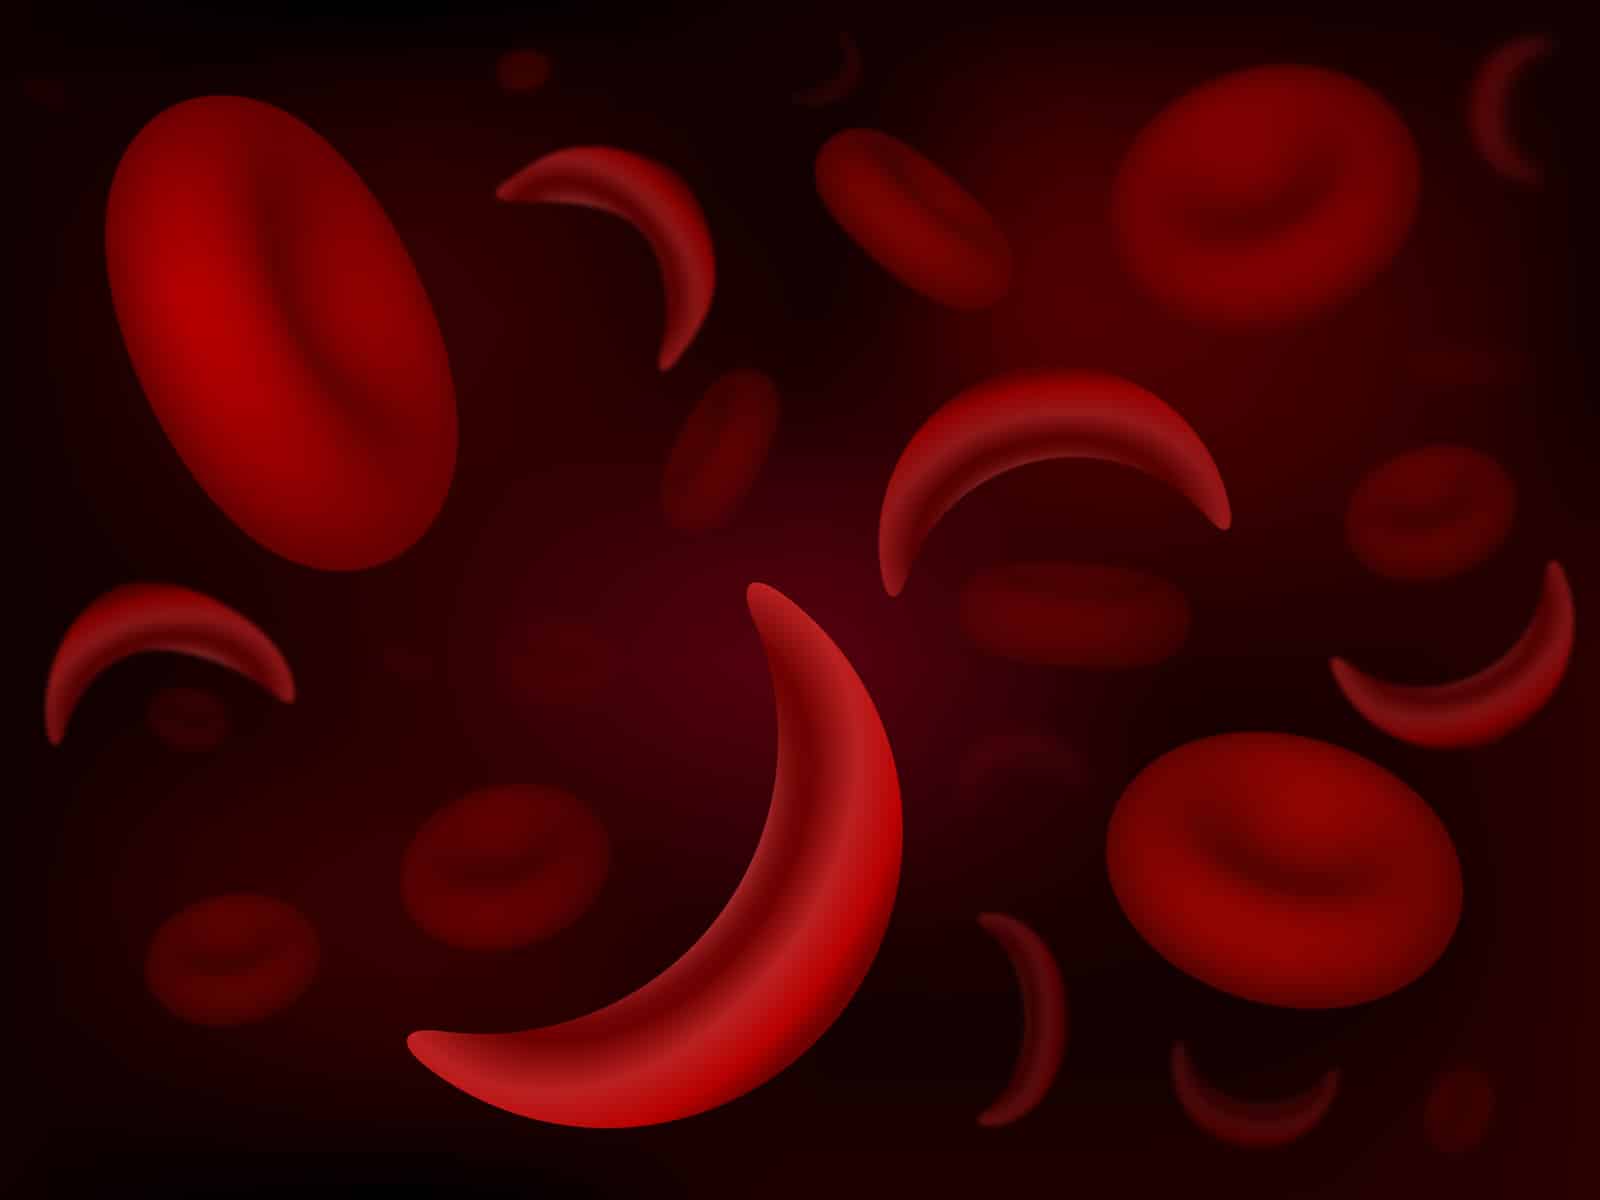 Sickle-cell and normal red blood cells